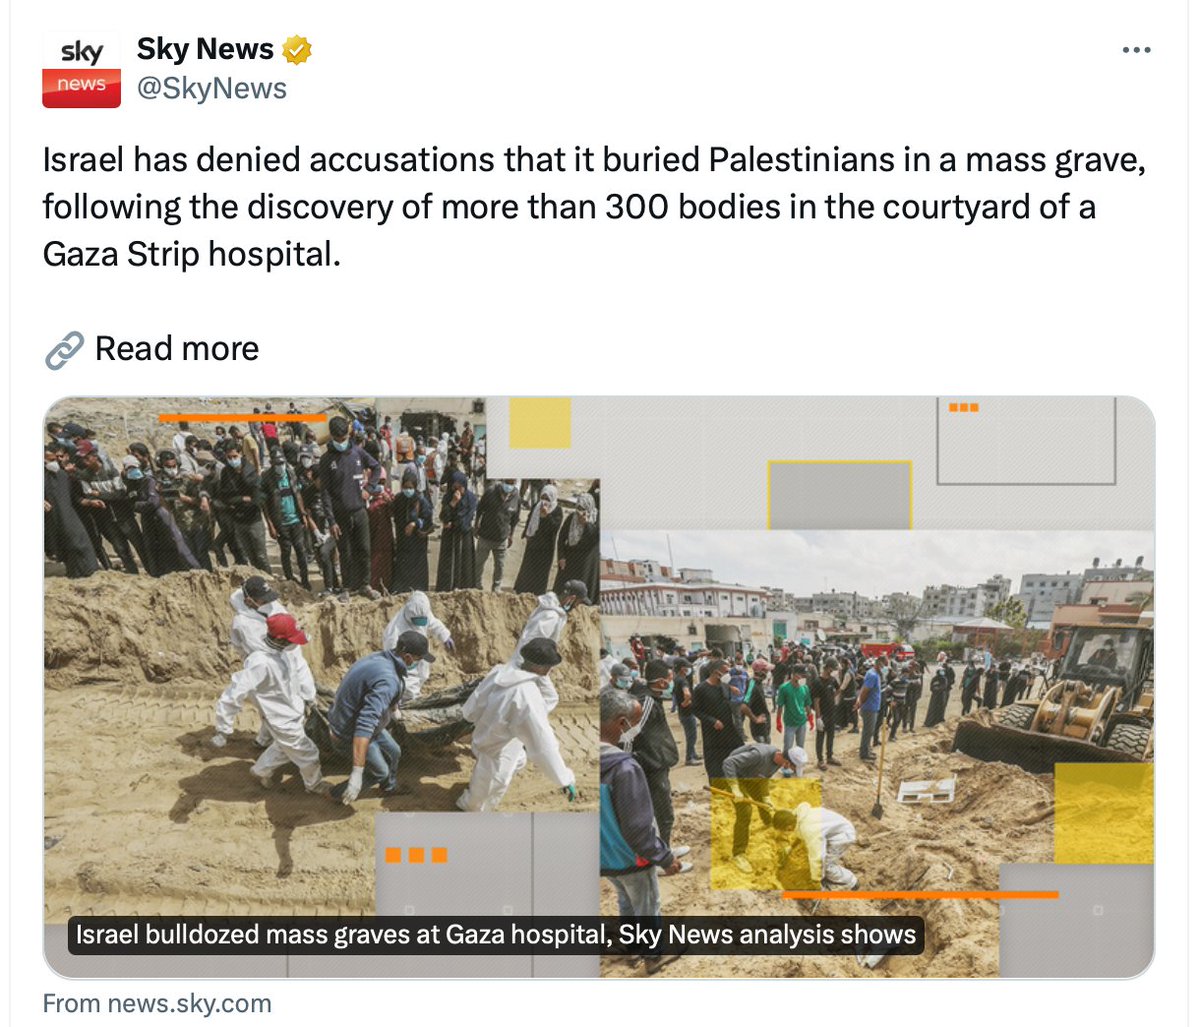 @SkyNews This is a disgracefully dishonest tweet. Even your own report shows these people were buried by Palestinians, contrary to the wild conspiracy theory floating around that it was a cover-up for a massacre by Israelis. @HonestReporting @CAMERAorg